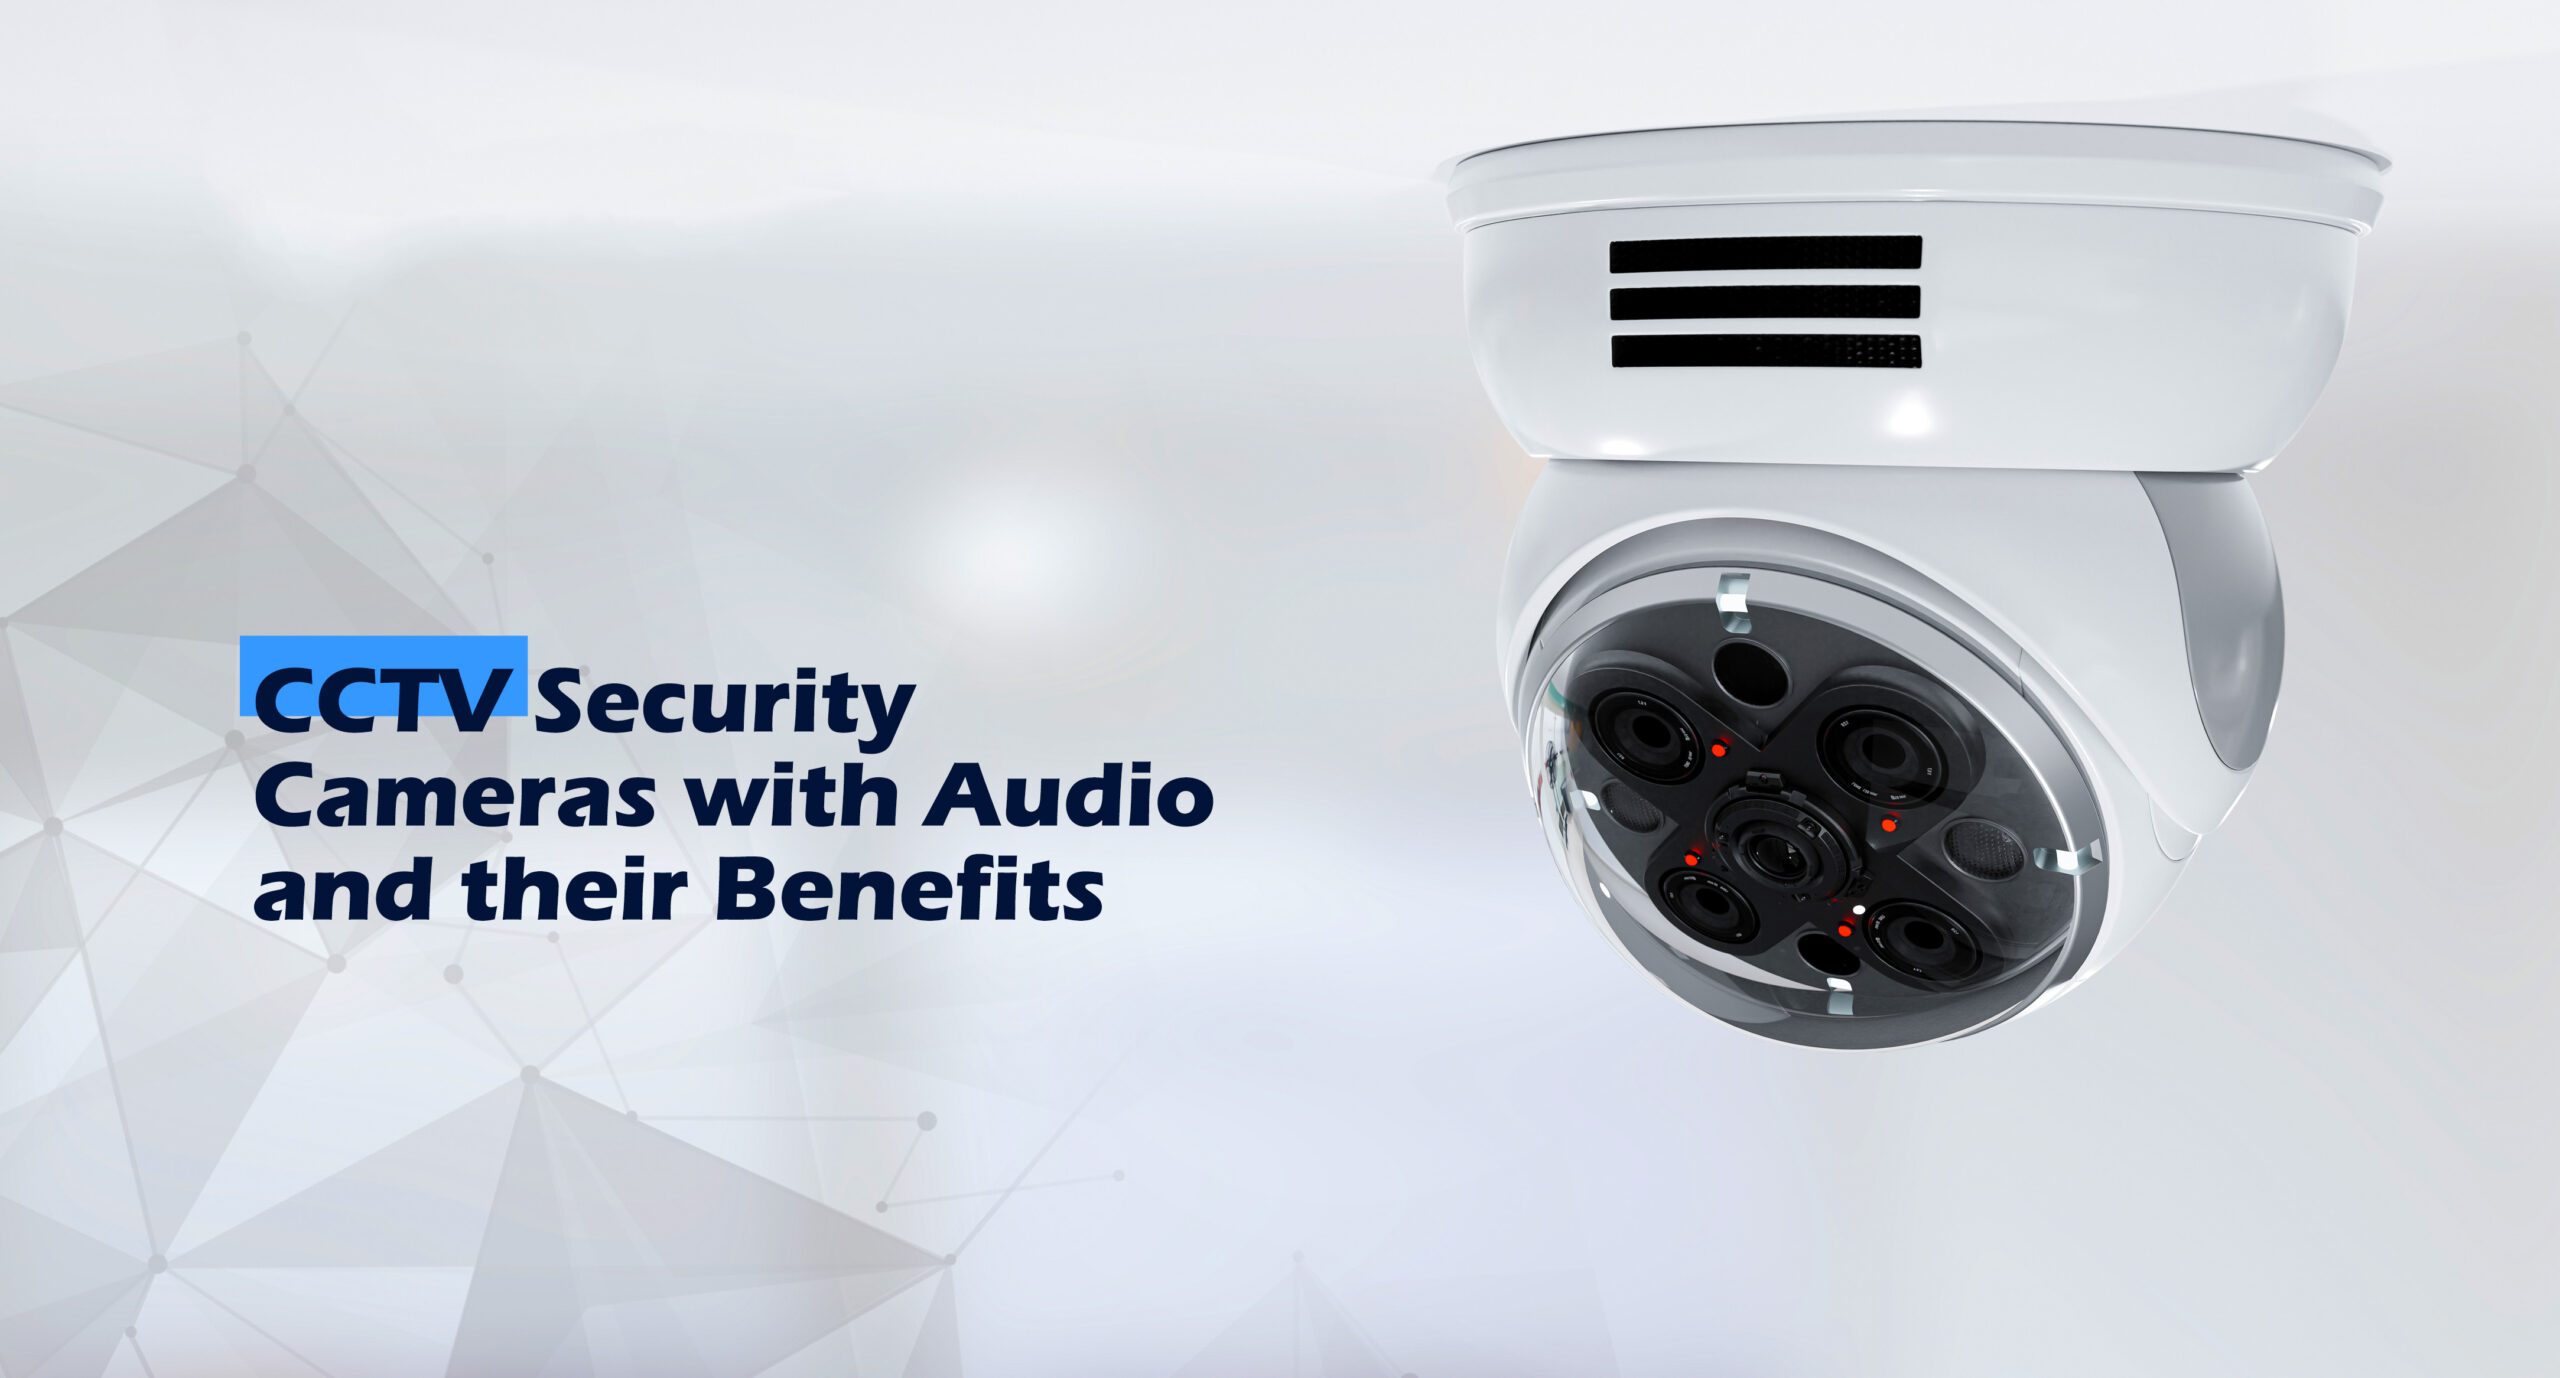 Featured image for “CCTV Security Cameras with Audio and their Benefits”